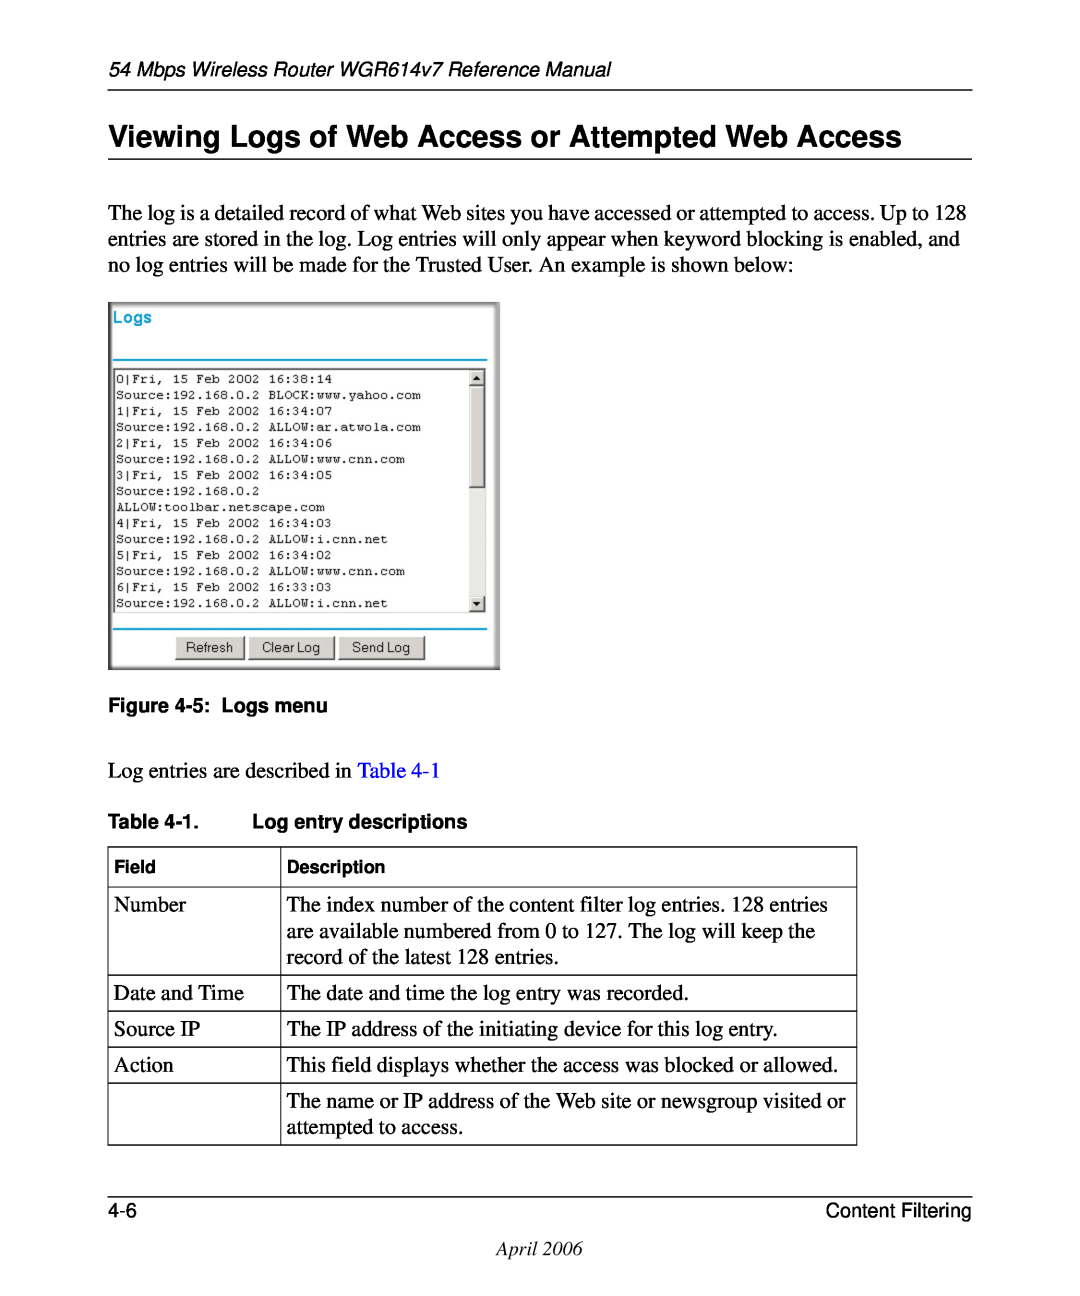 NETGEAR WGR614v7 manual Viewing Logs of Web Access or Attempted Web Access 